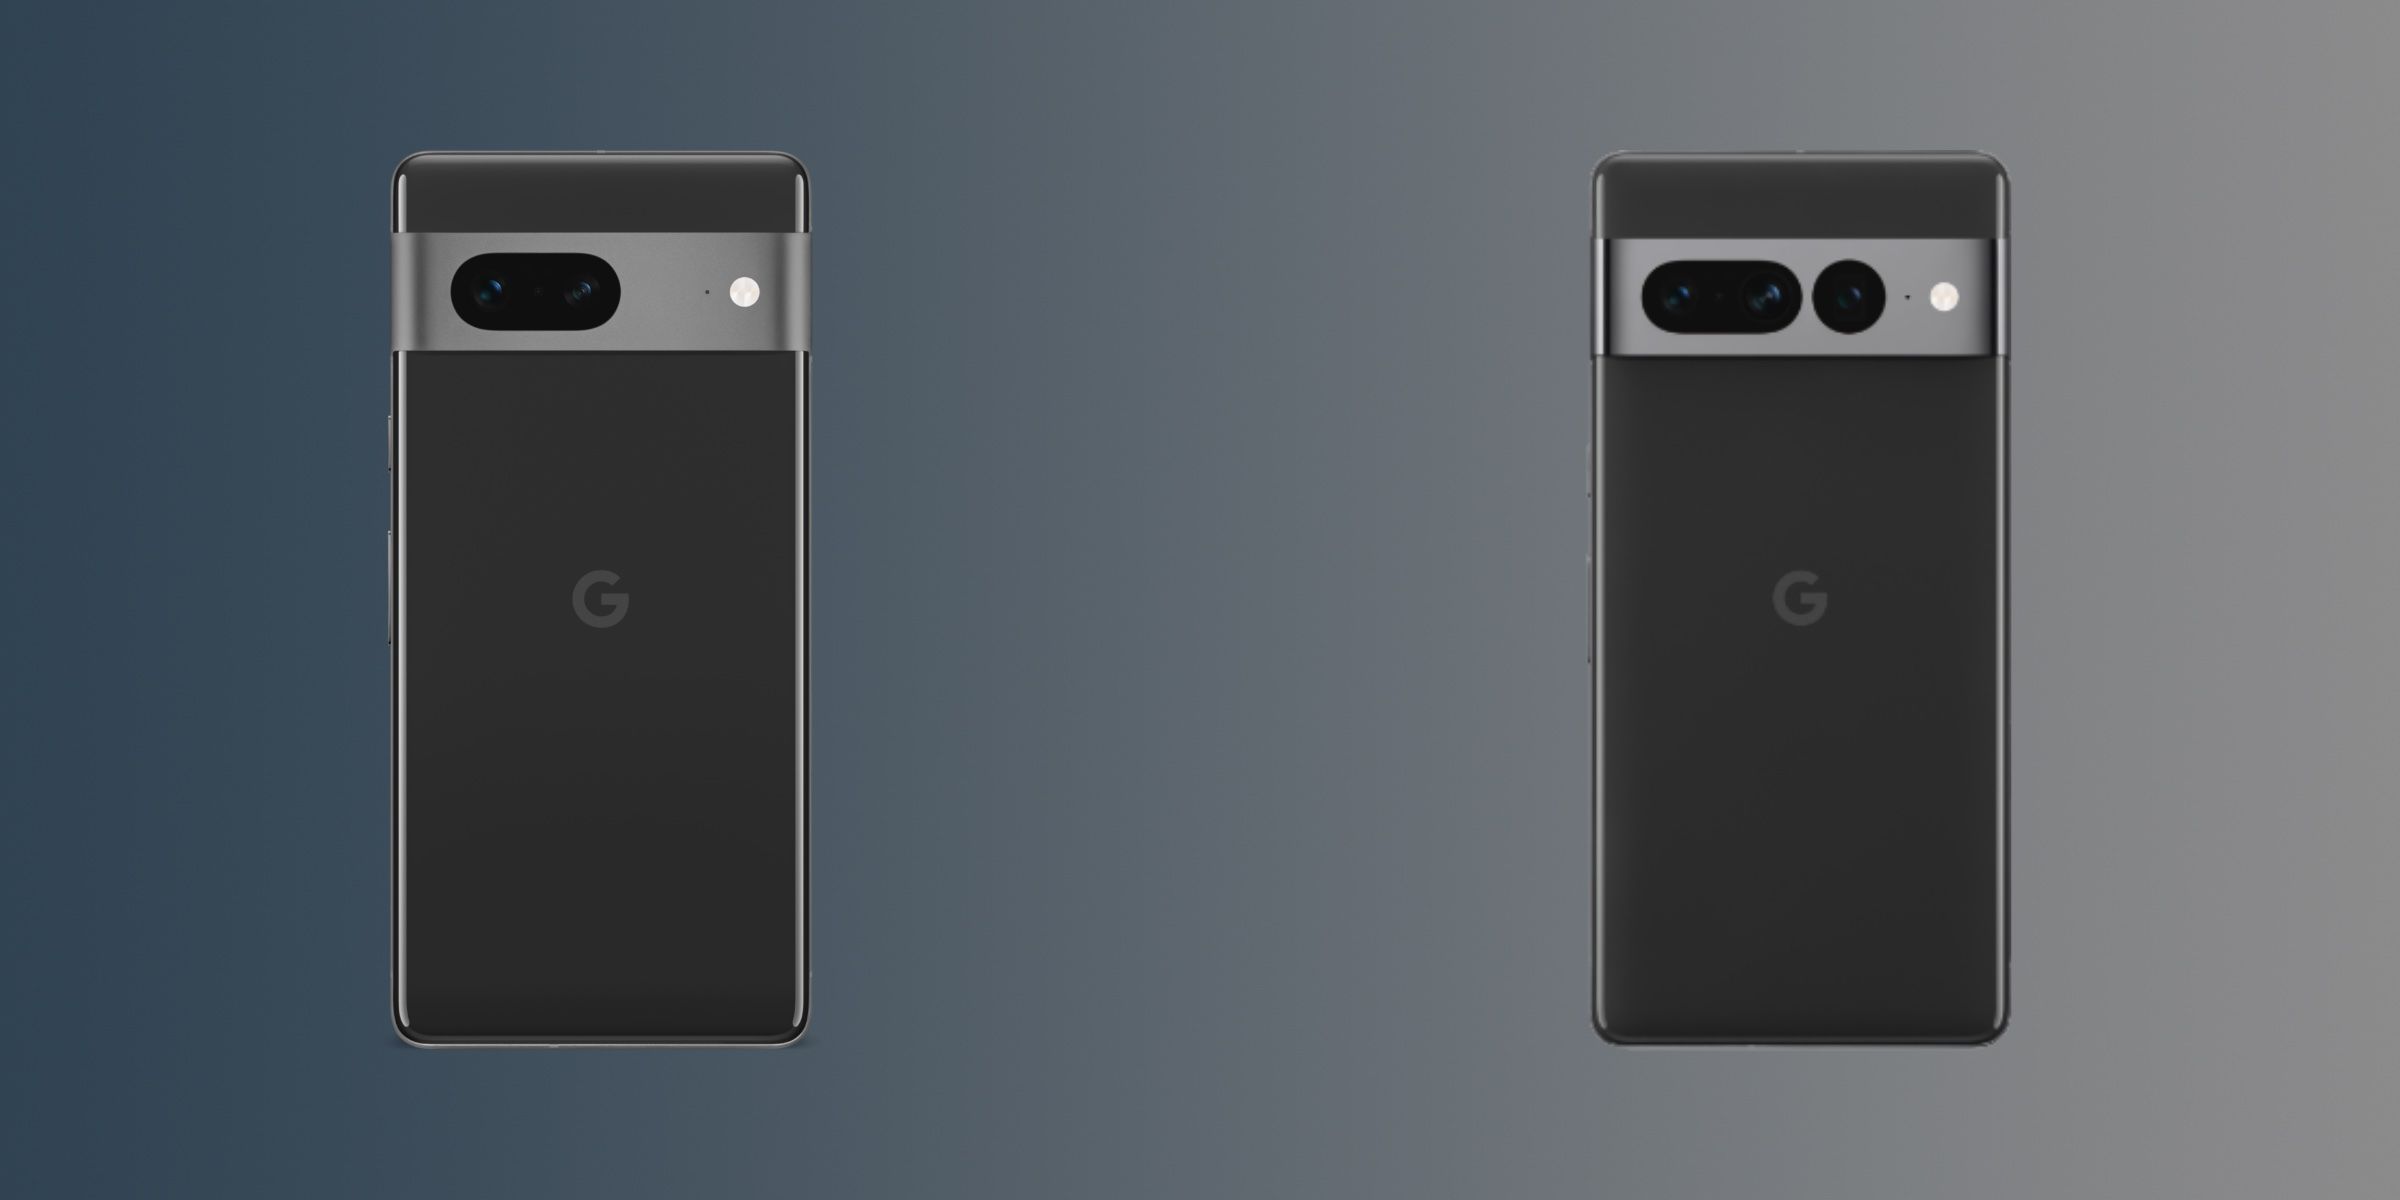 Obsidian-colored Pixel 7 and Pixel 7 Pro against a blue and gray gradient background.